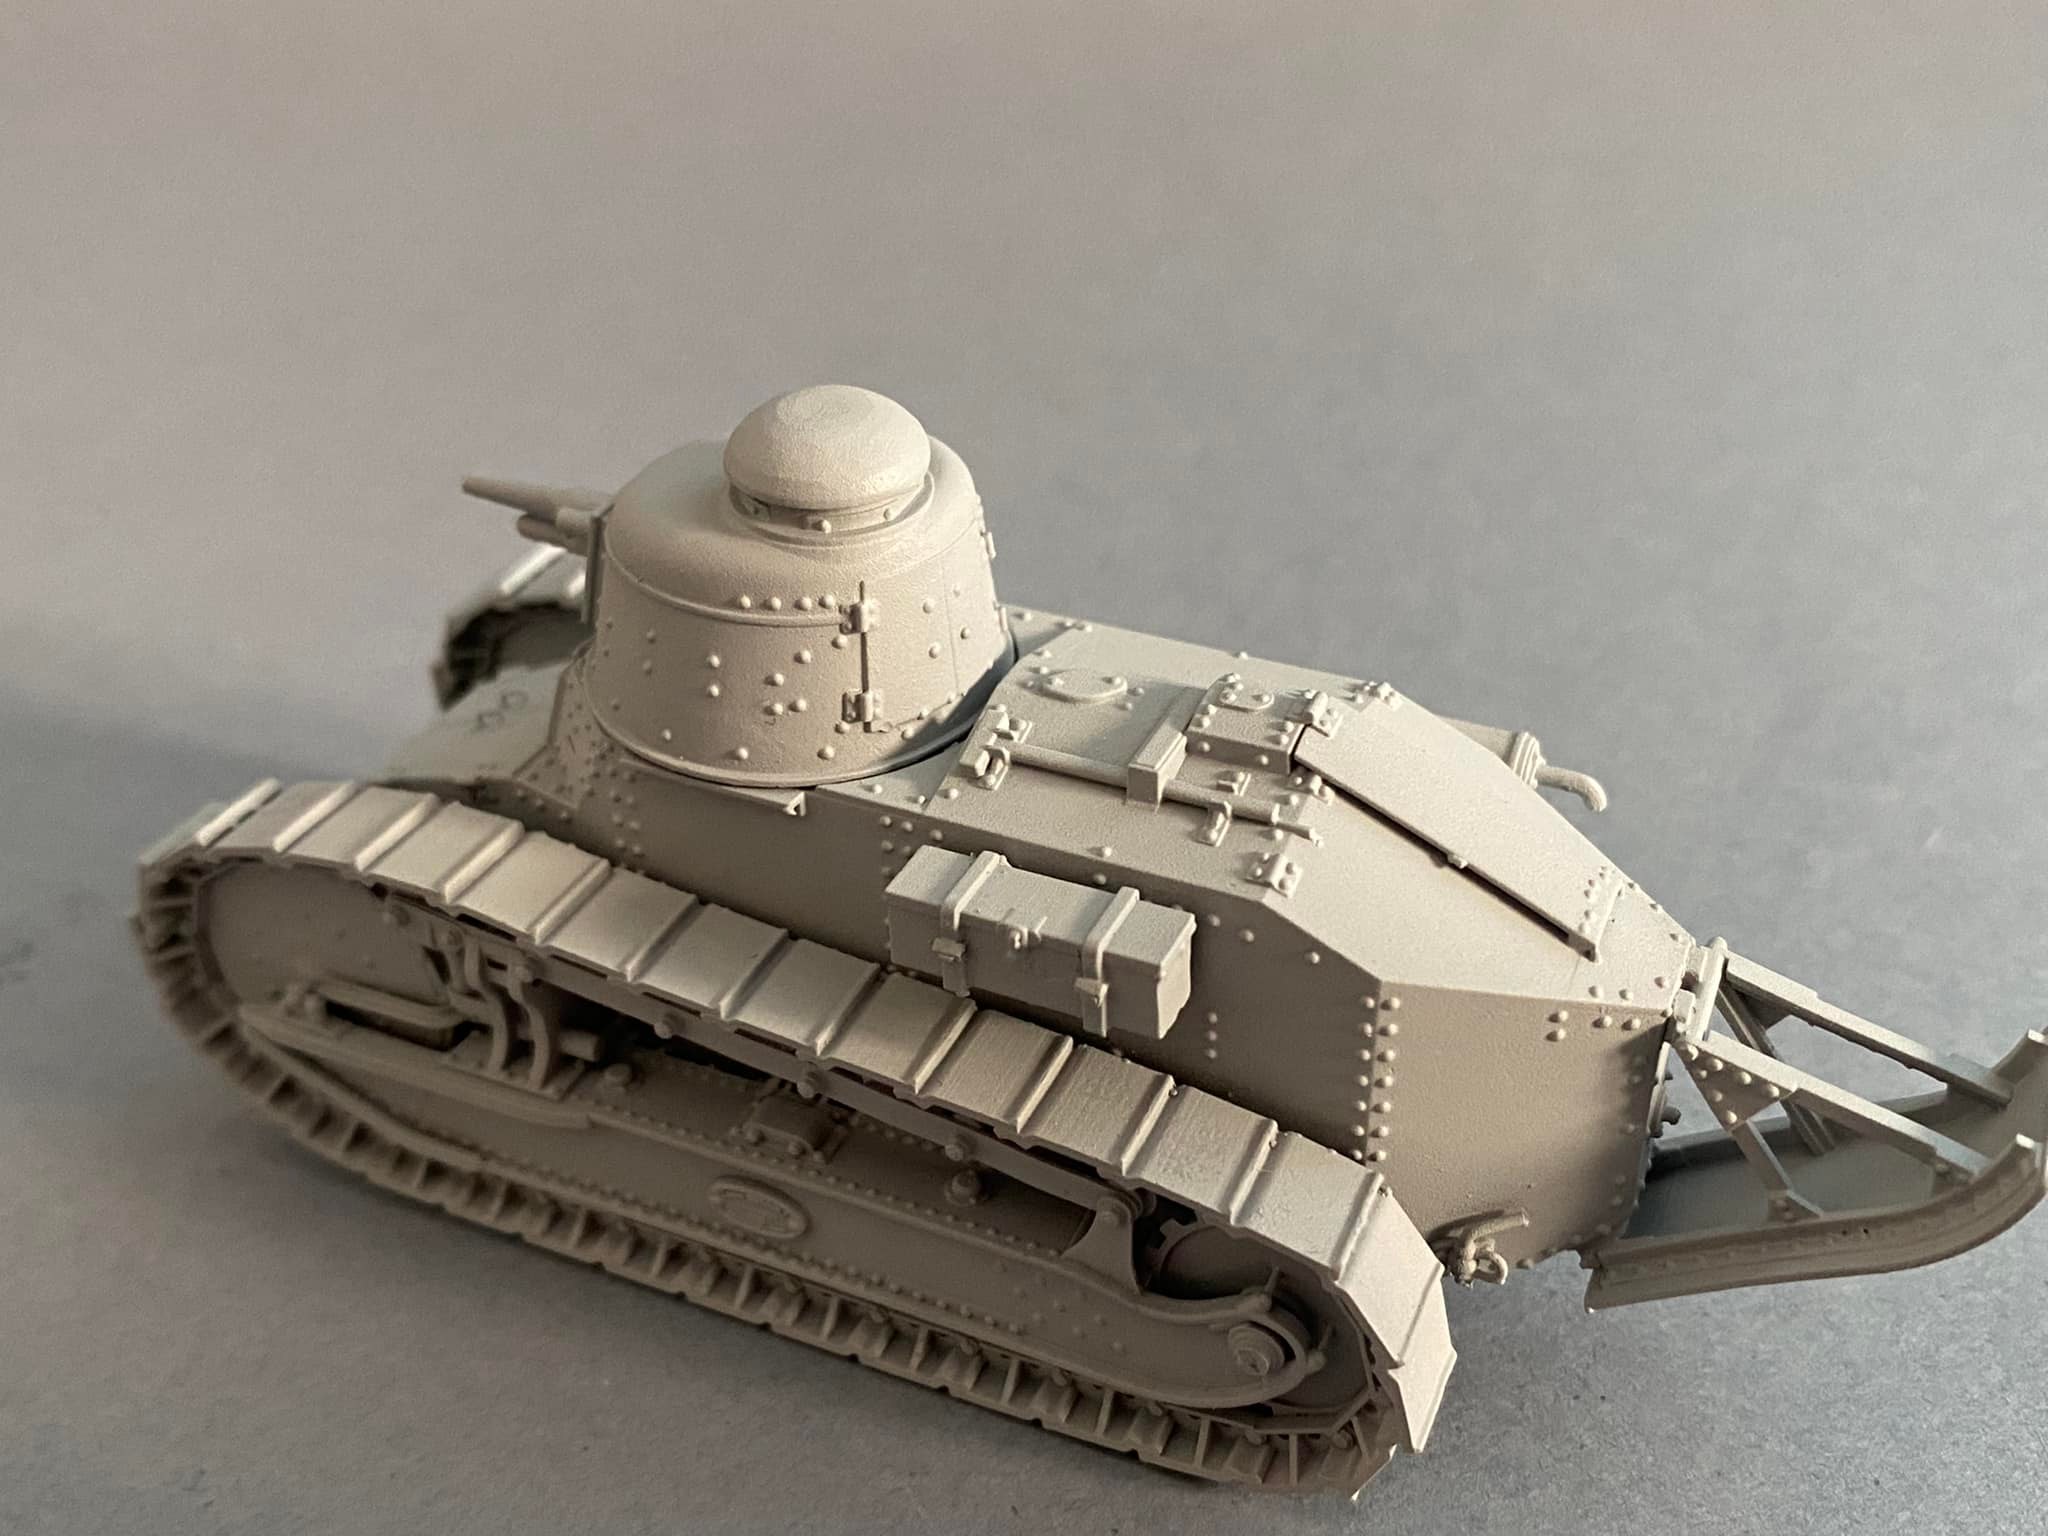 F&A Miniatures - Renault FT-17 - 1/48 scale